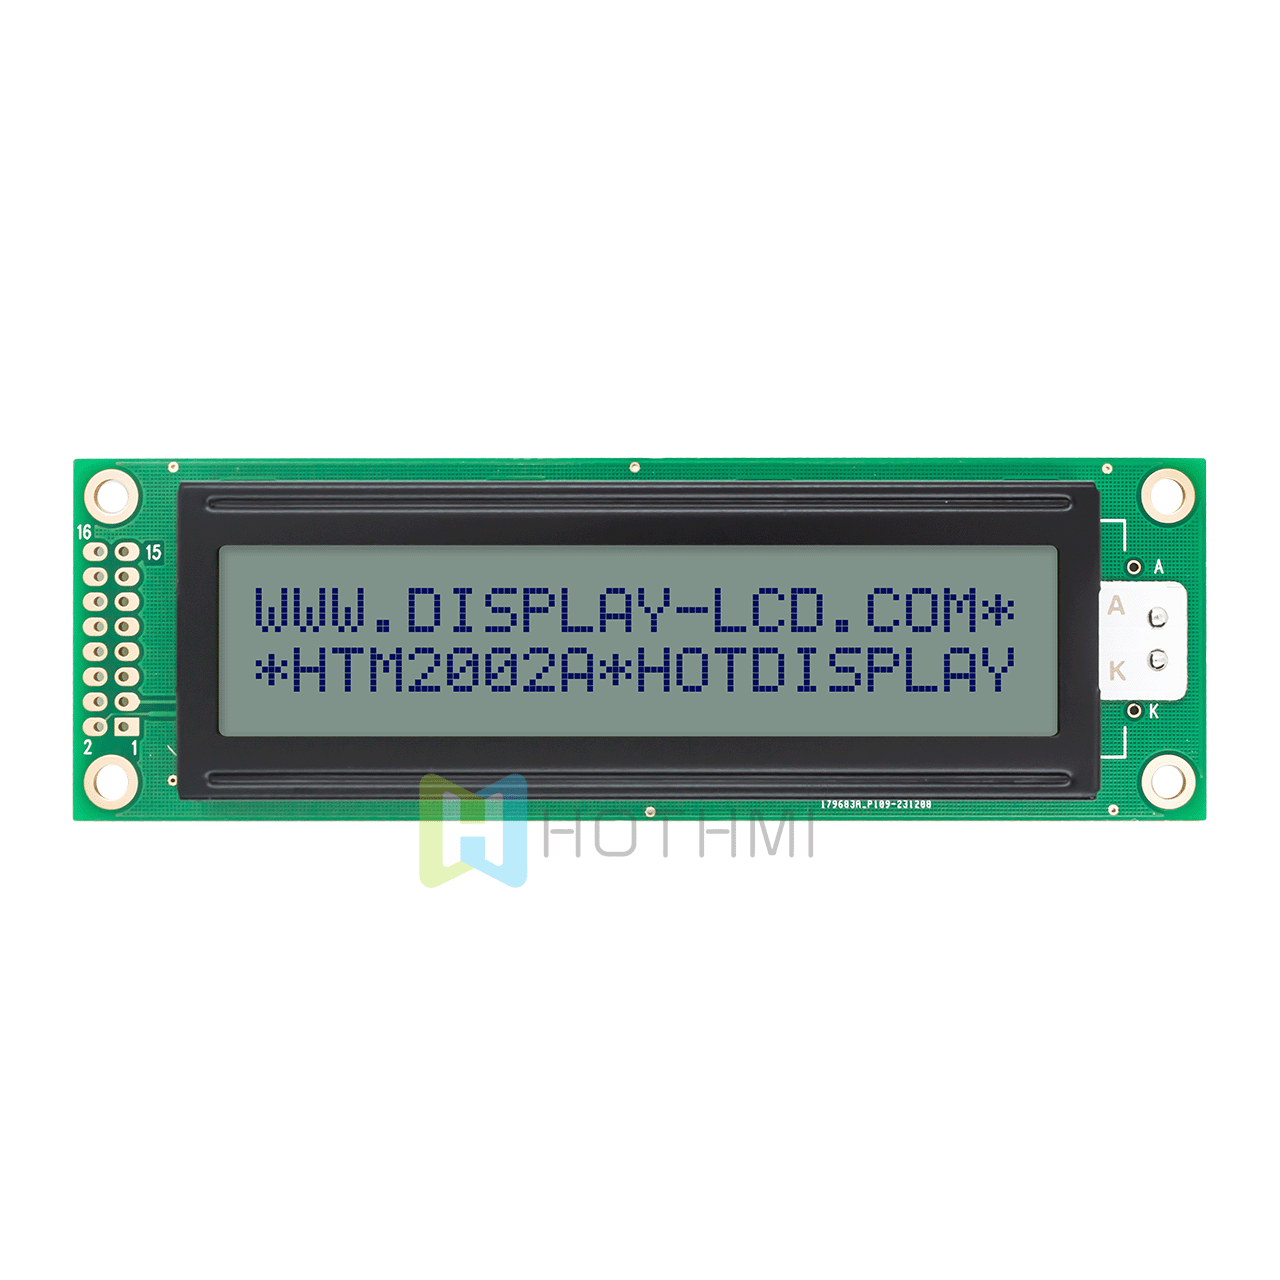 2X20 character monochrome LCD Module | STN+ gray background blue character display | 5.0V | transflective display | ST7066U controller | Adruino